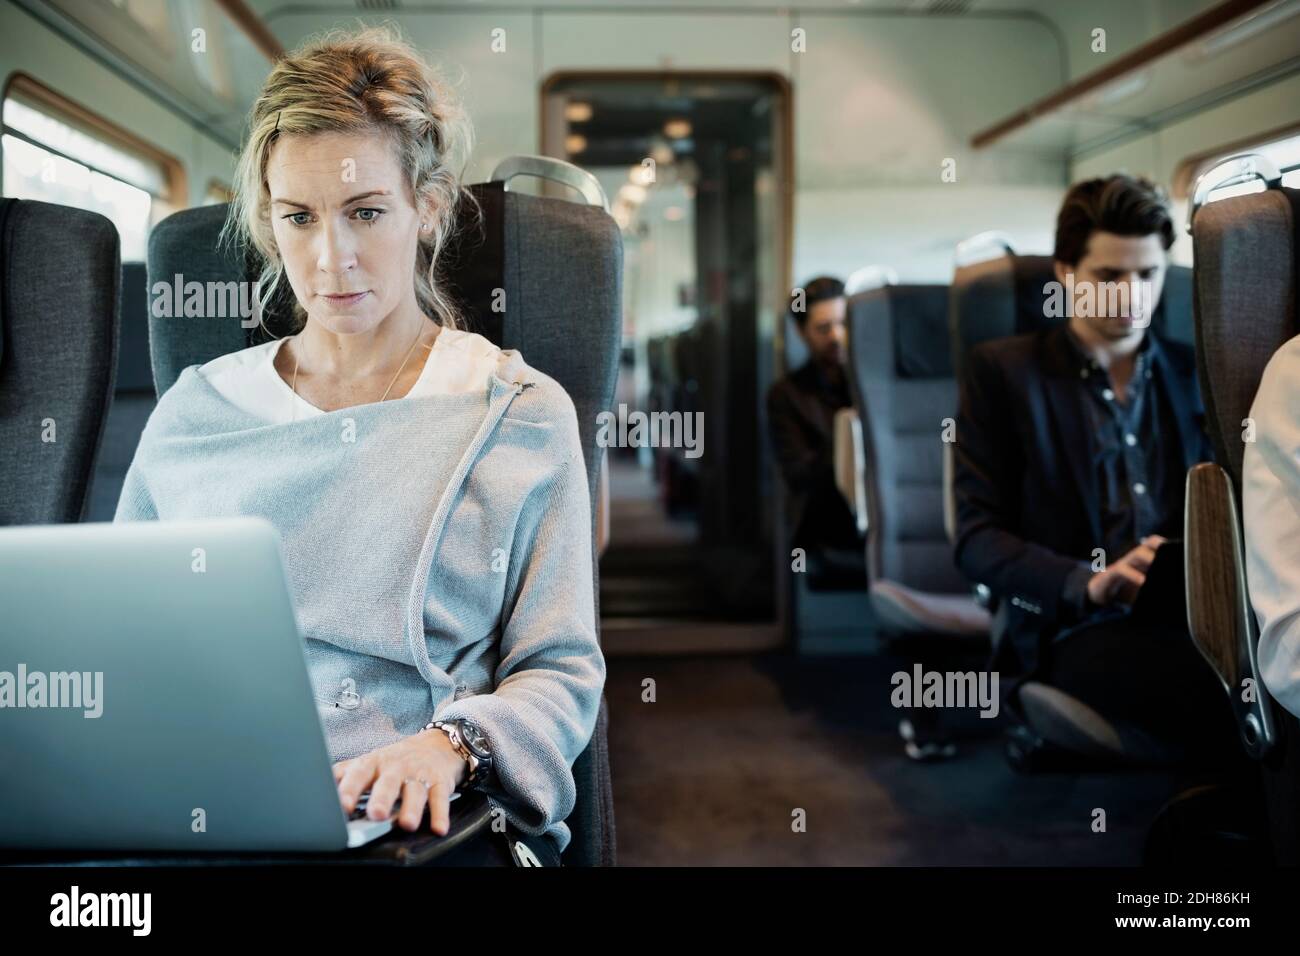 Business people traveling in train Stock Photo